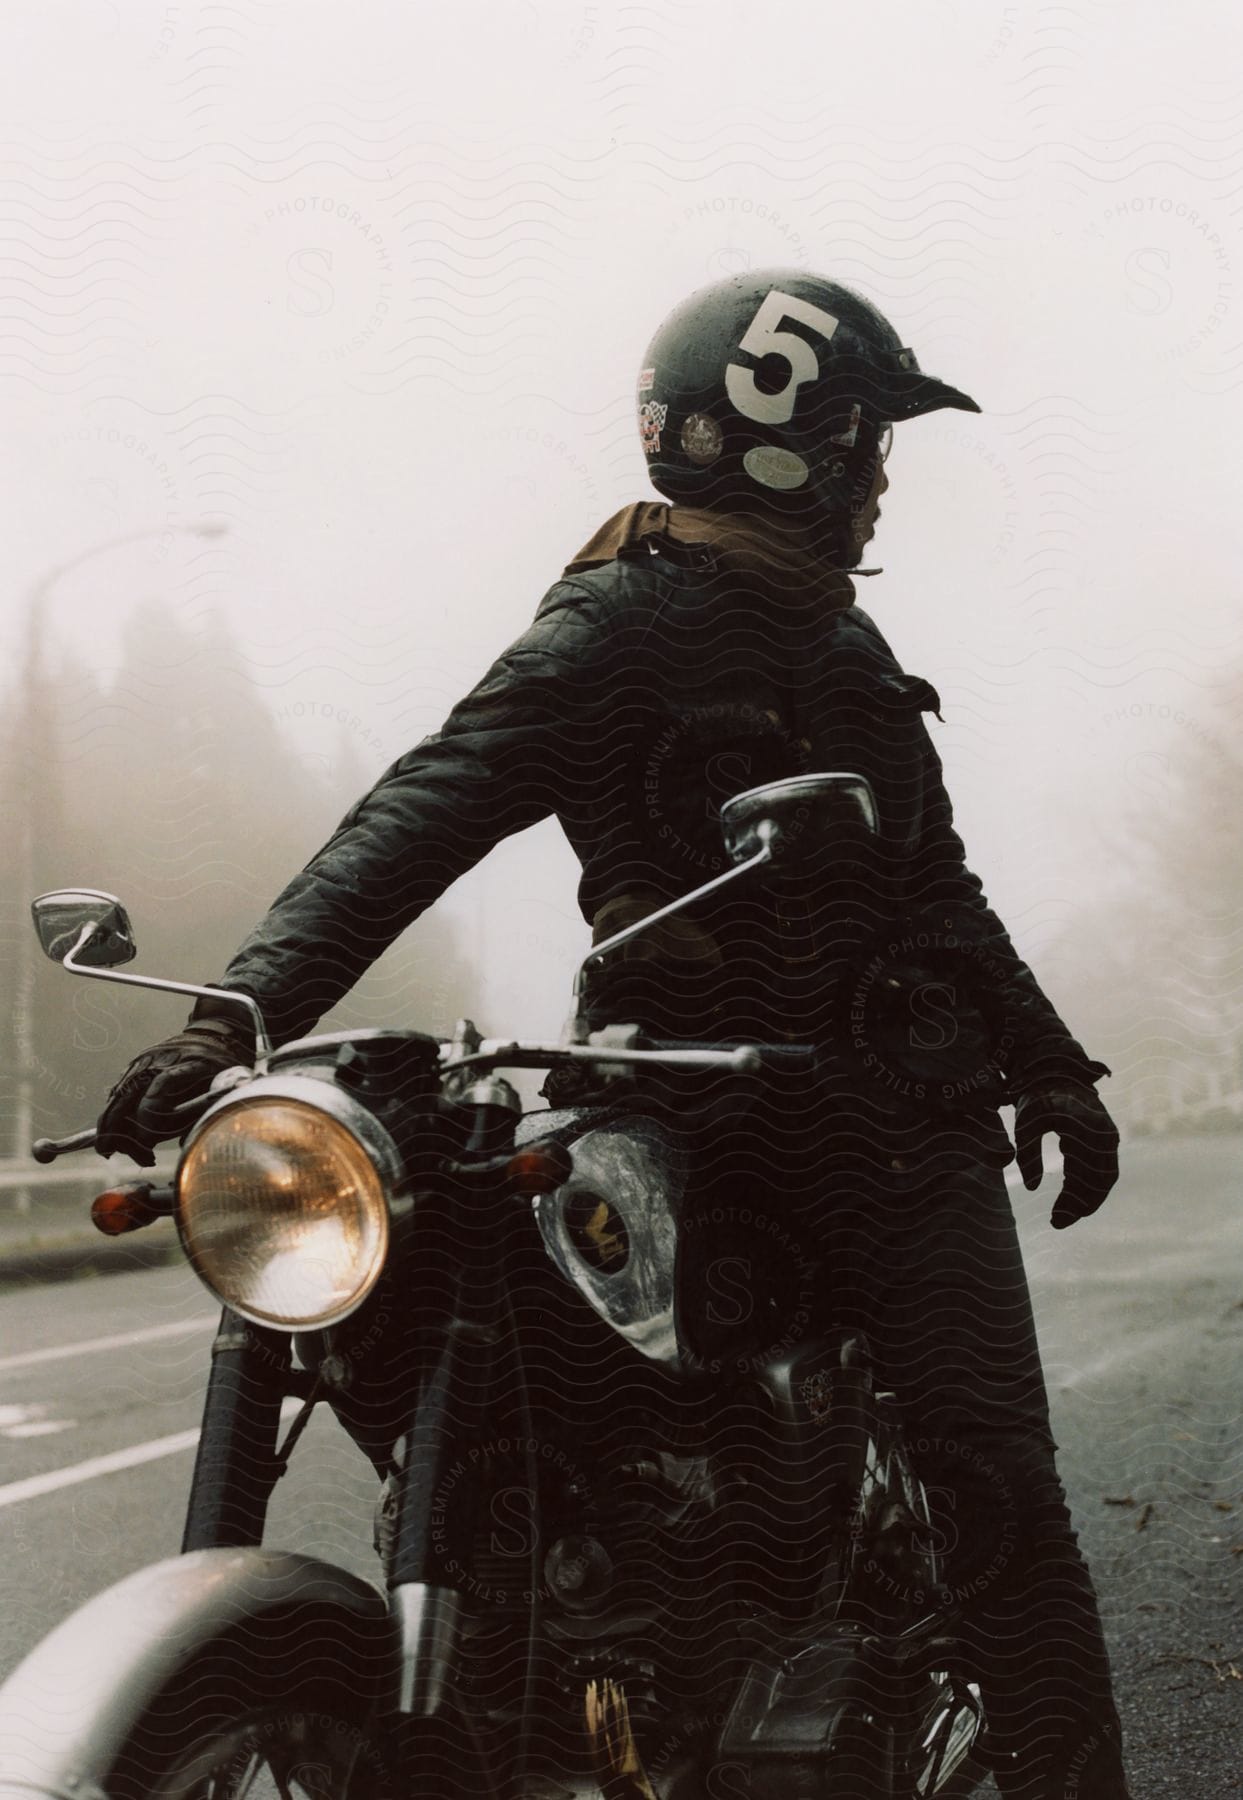 A man sitting on his motorcycle on the roadside looks at the fog covered road behind him